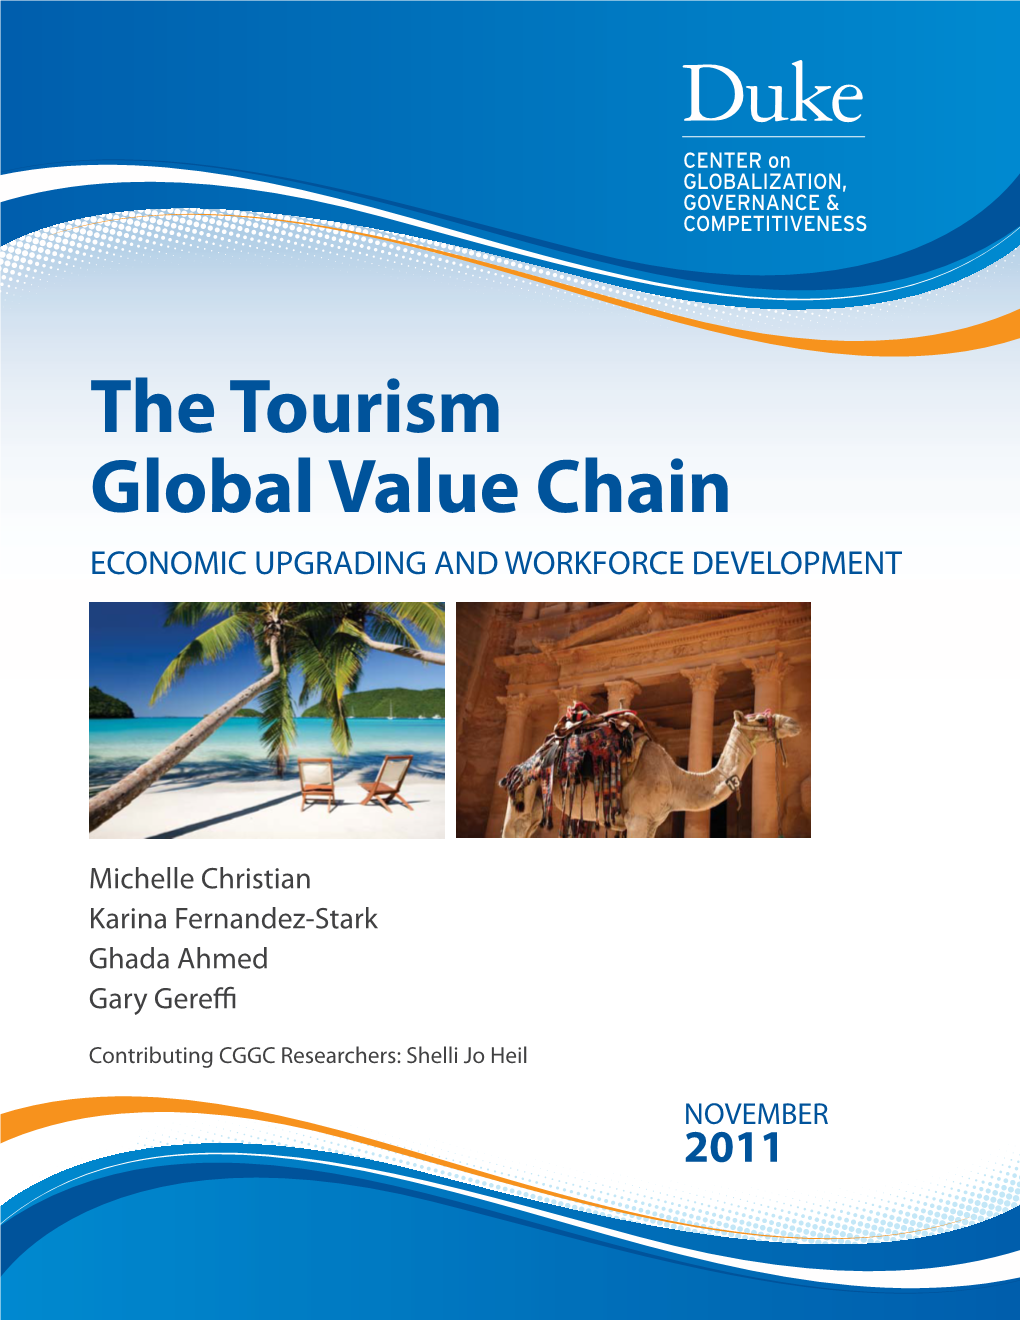 The Tourism Global Value Chain